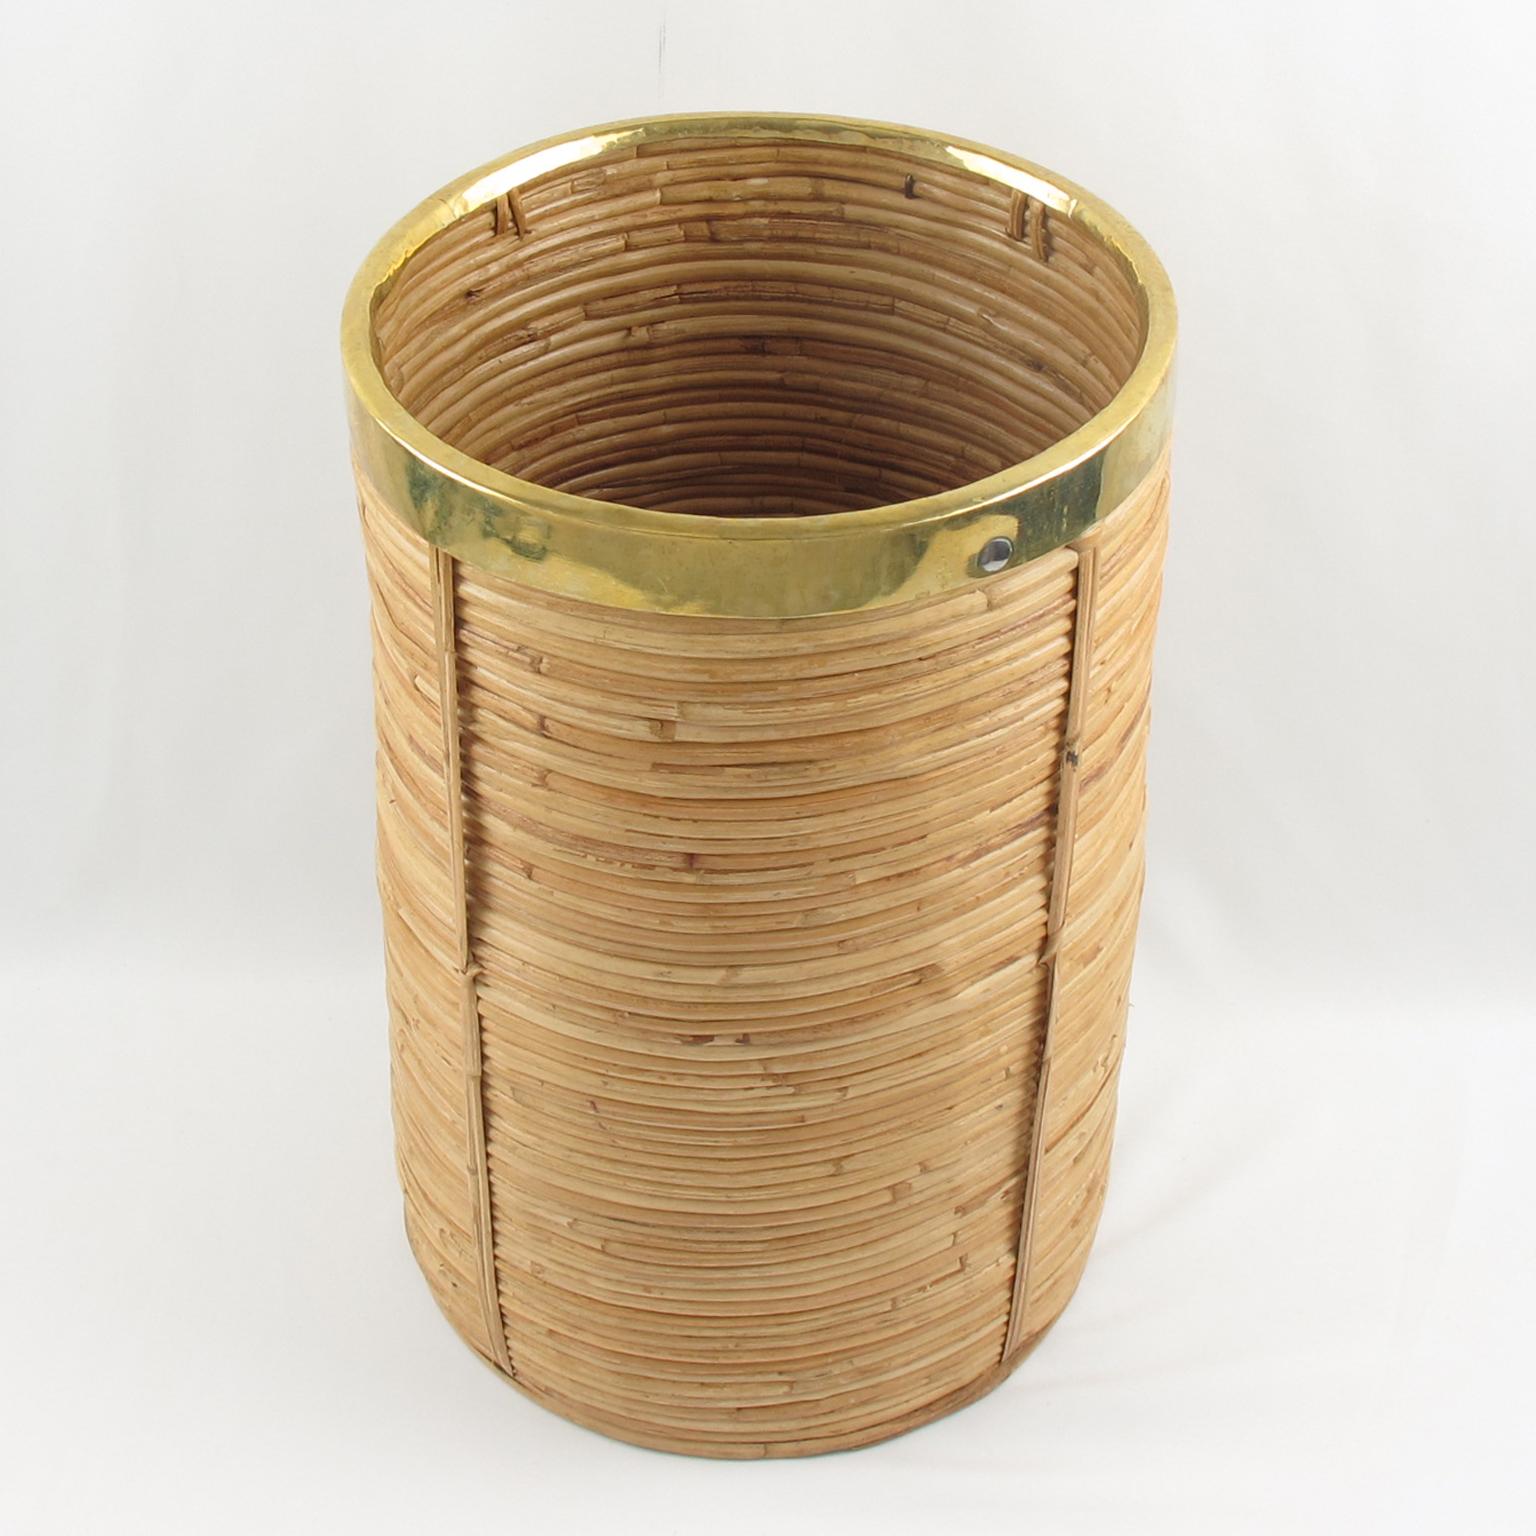 Elegant 1970s brass and bamboo, rattan or wicker tall planter or umbrella stand, reminiscent of Gabriella Crespi work. Round shape with gilded brass trim. No visible marking.
Measurements: 10.25 in. diameter (26 cm) x 15.75 in. high (40 cm).